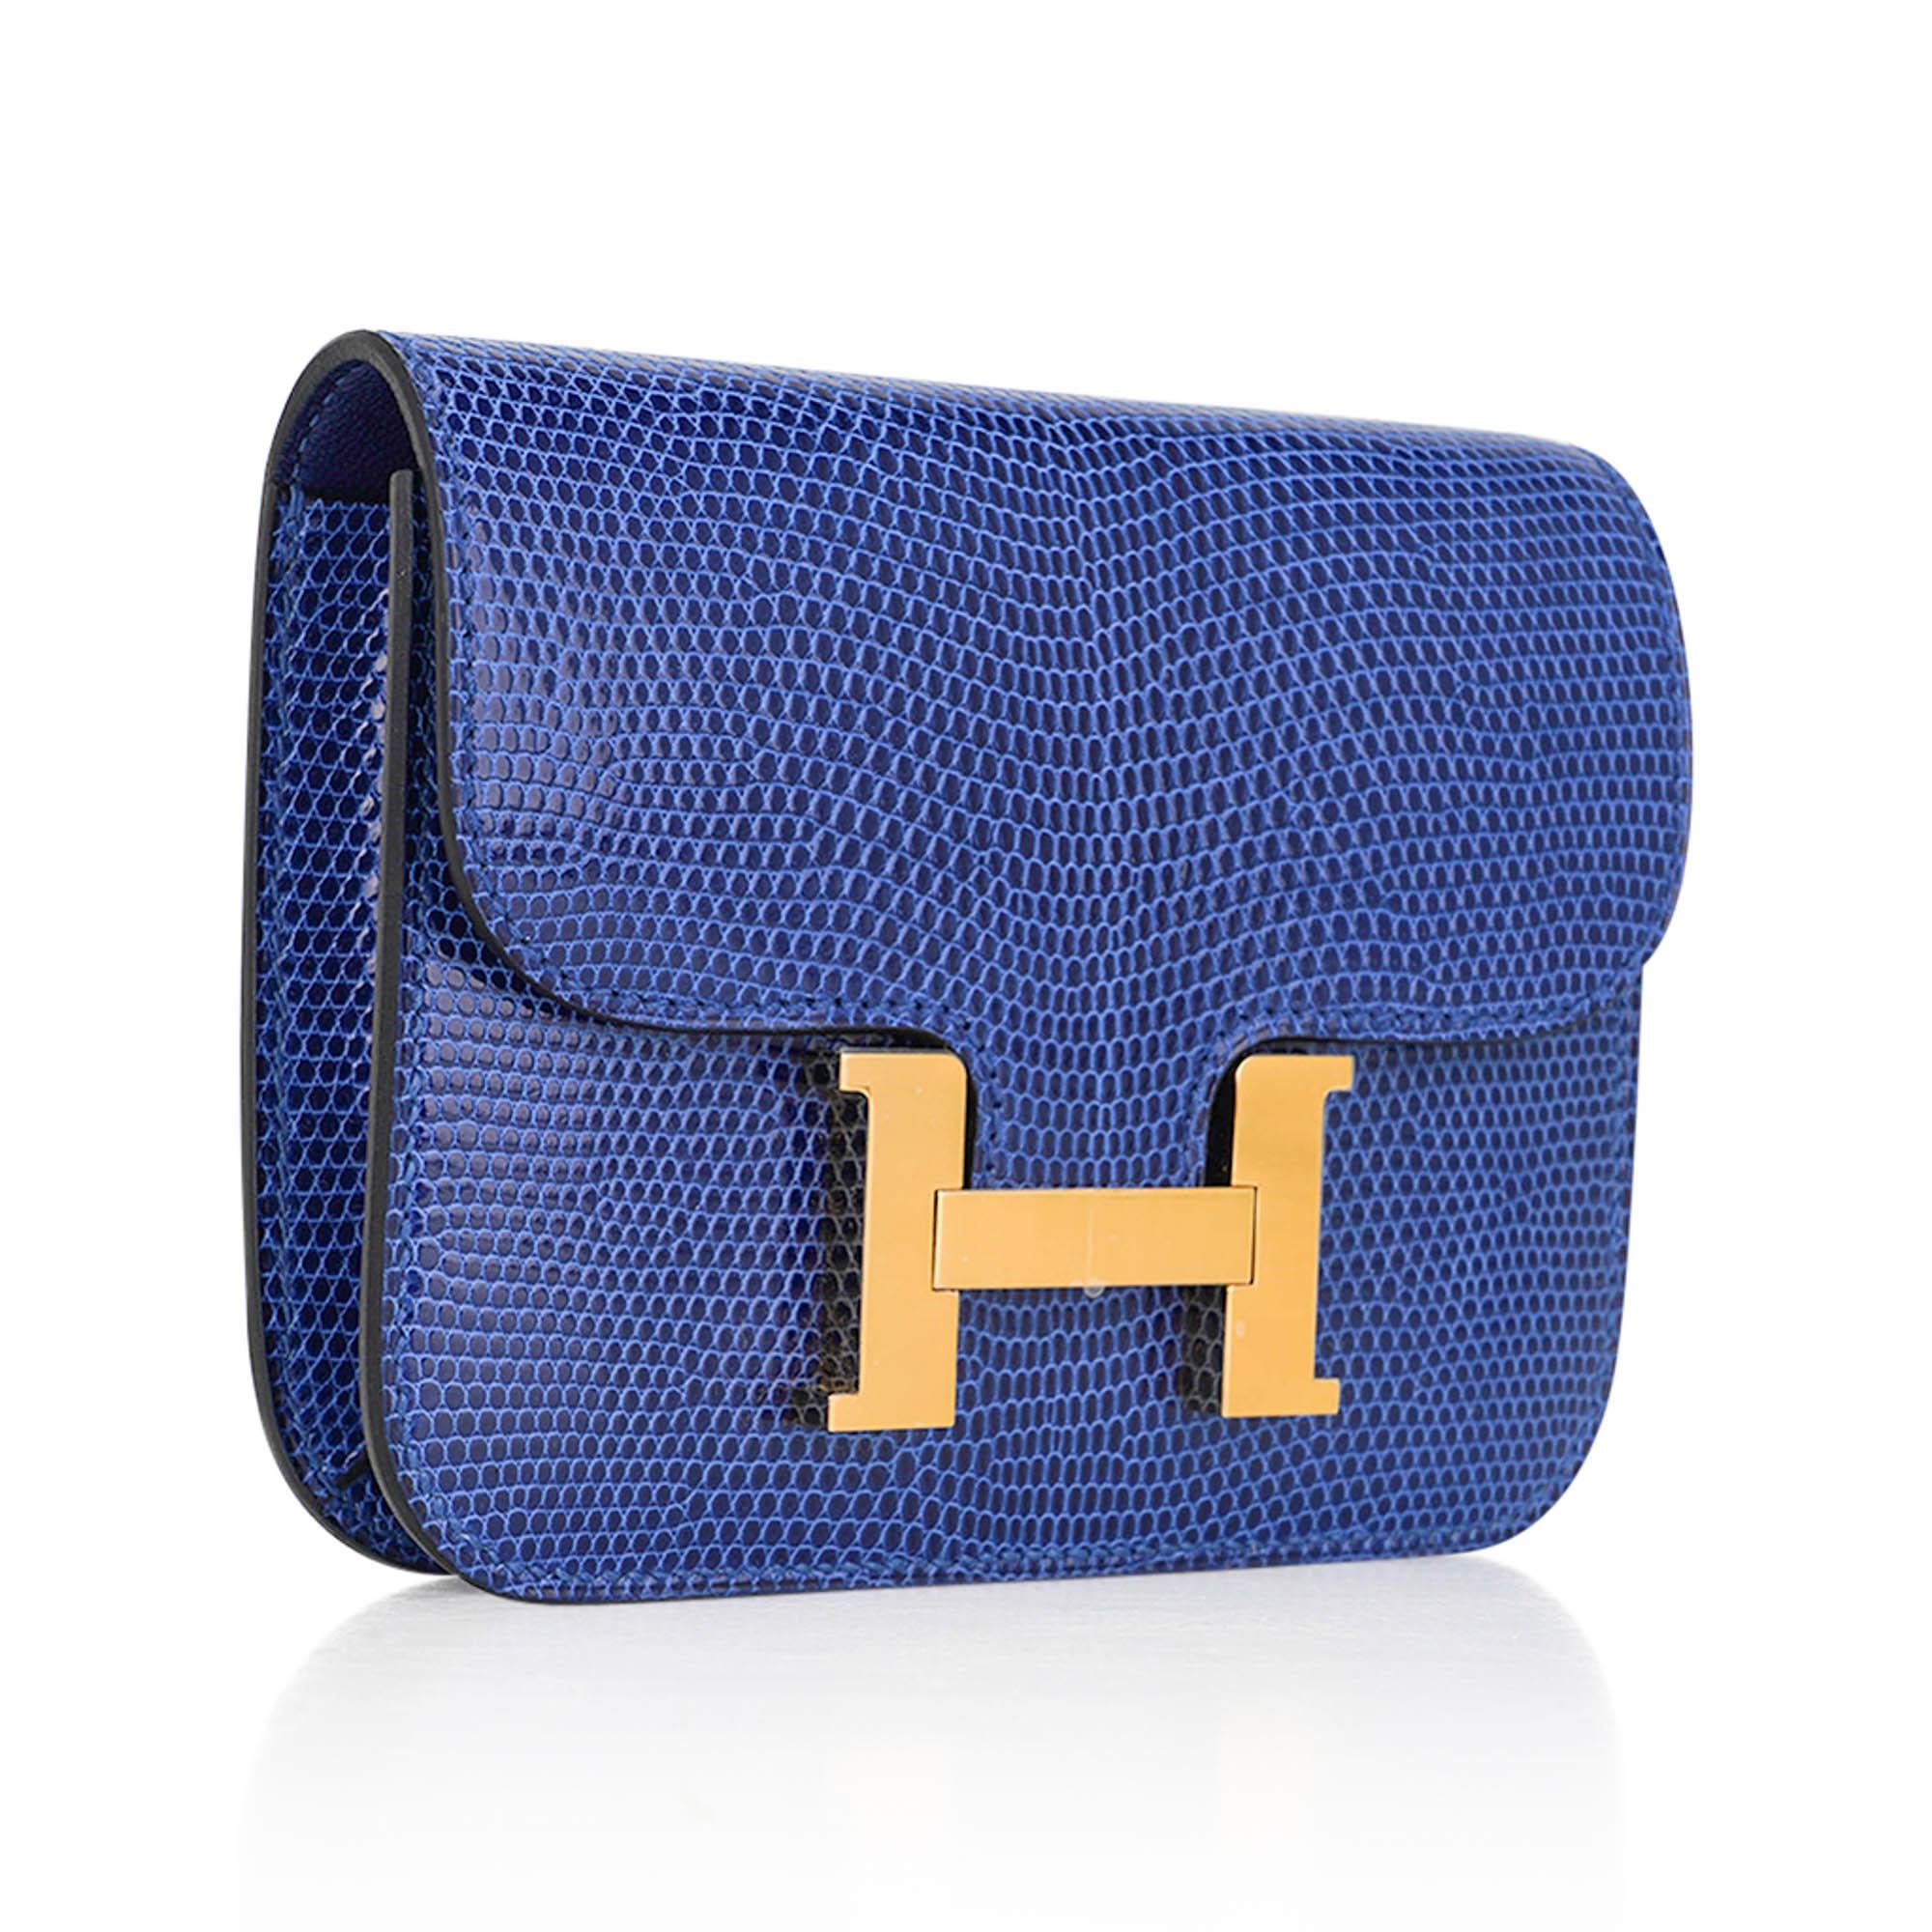 Mightychic offers an Hermes Constance Slim Wallet Belt bag featured in Bleu Sapphire Lizard.
Richly saturated, this exquisite versatile wallet is a rare find.
Includes removable zipped change purse and 2 credit card slots
Beautiful with Gold